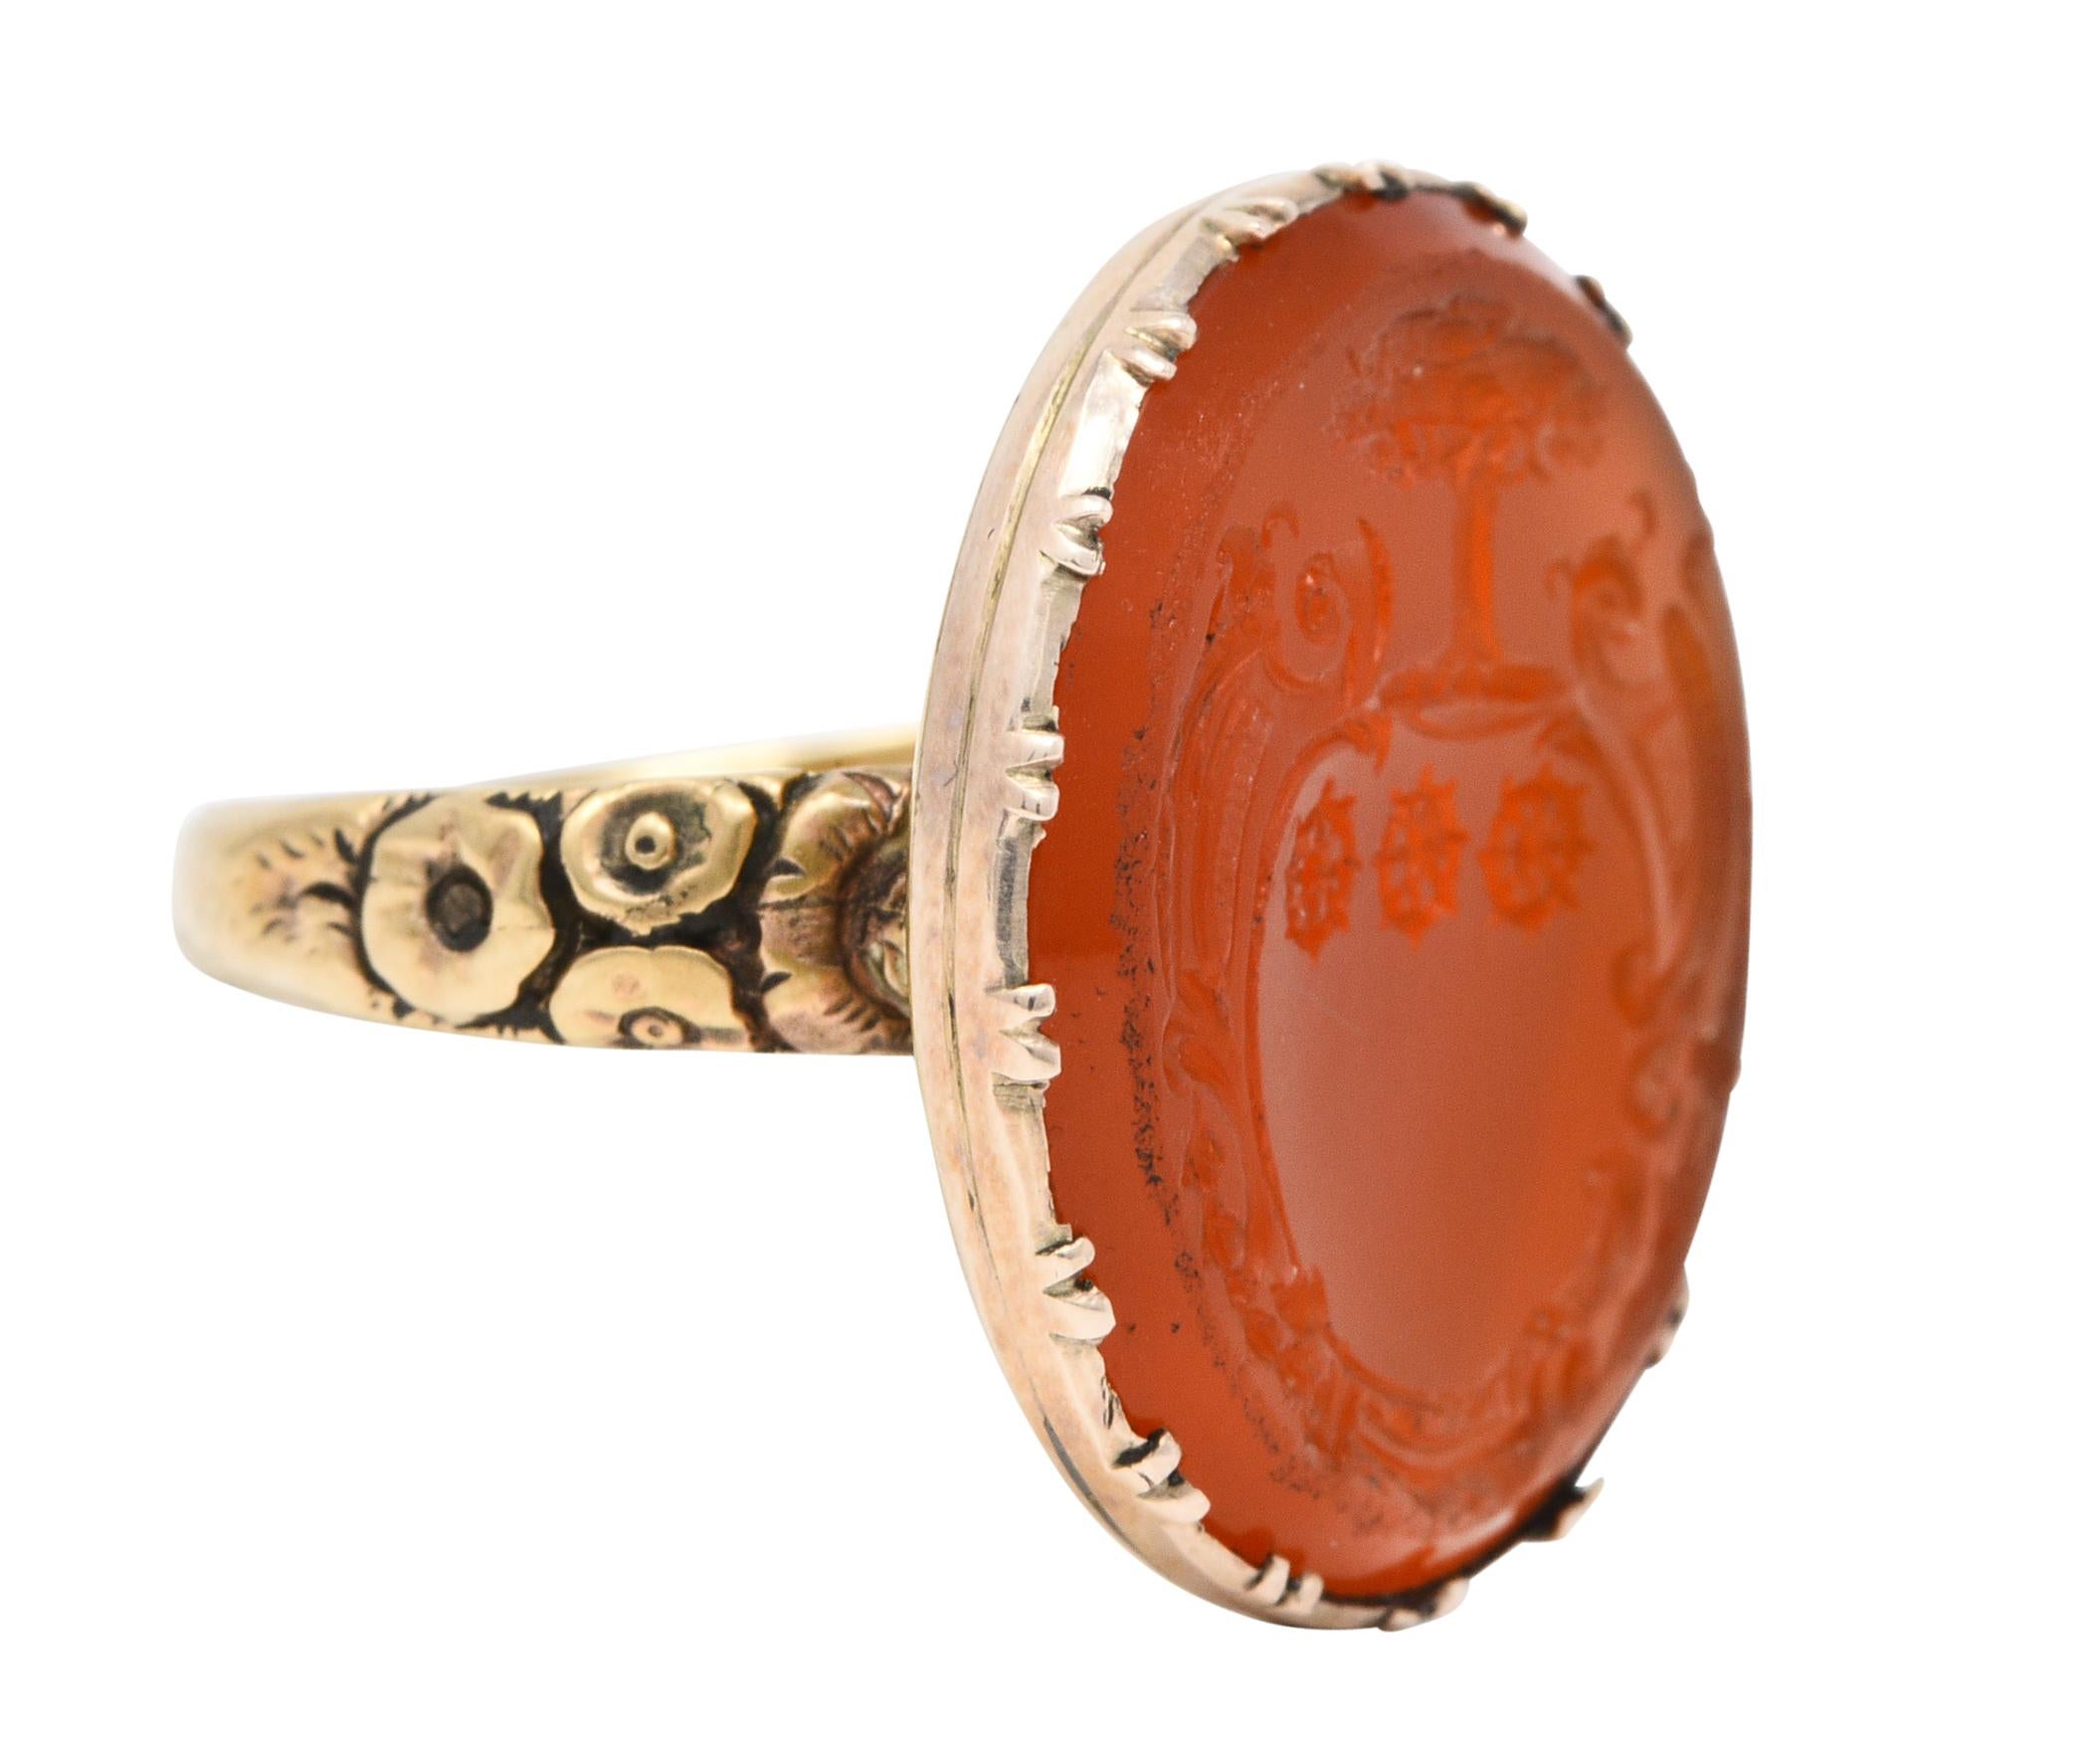 Featuring a carved oval carnelian measuring approximately 21.0 x 19.0 mm

Vibrantly translucent orange and uniform in color

Depicting a whiplashed cartouche shield with three spoked wheels topped by a flourishing tree

Tree is symbolic of strength